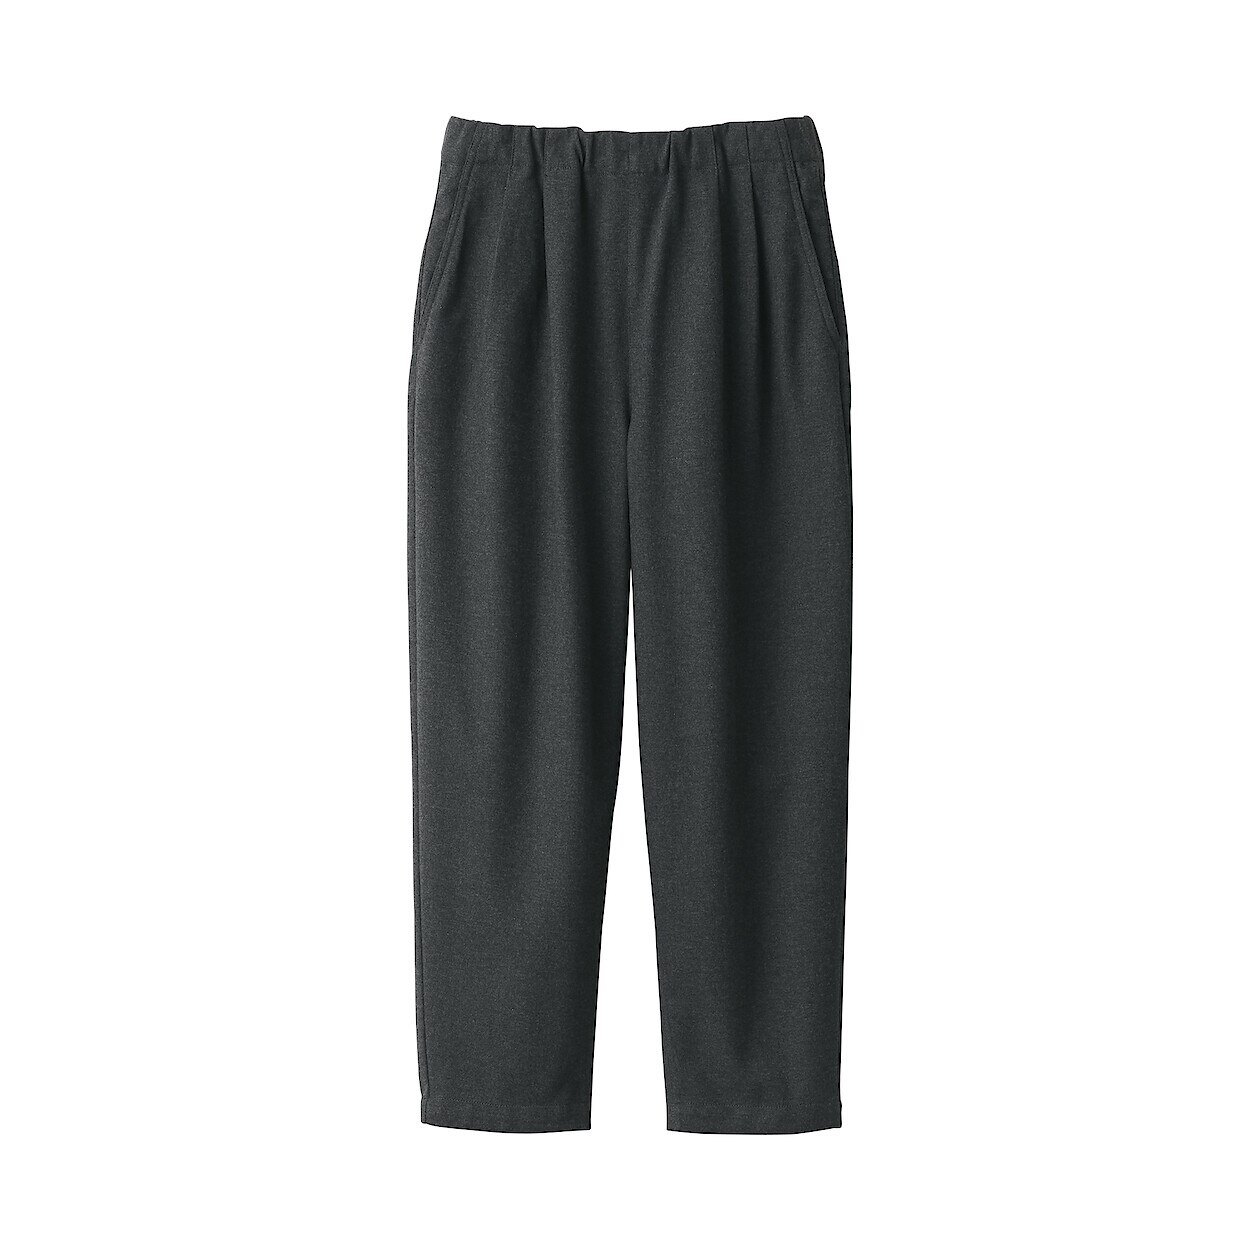 Unisex Polyester Blend Trousers